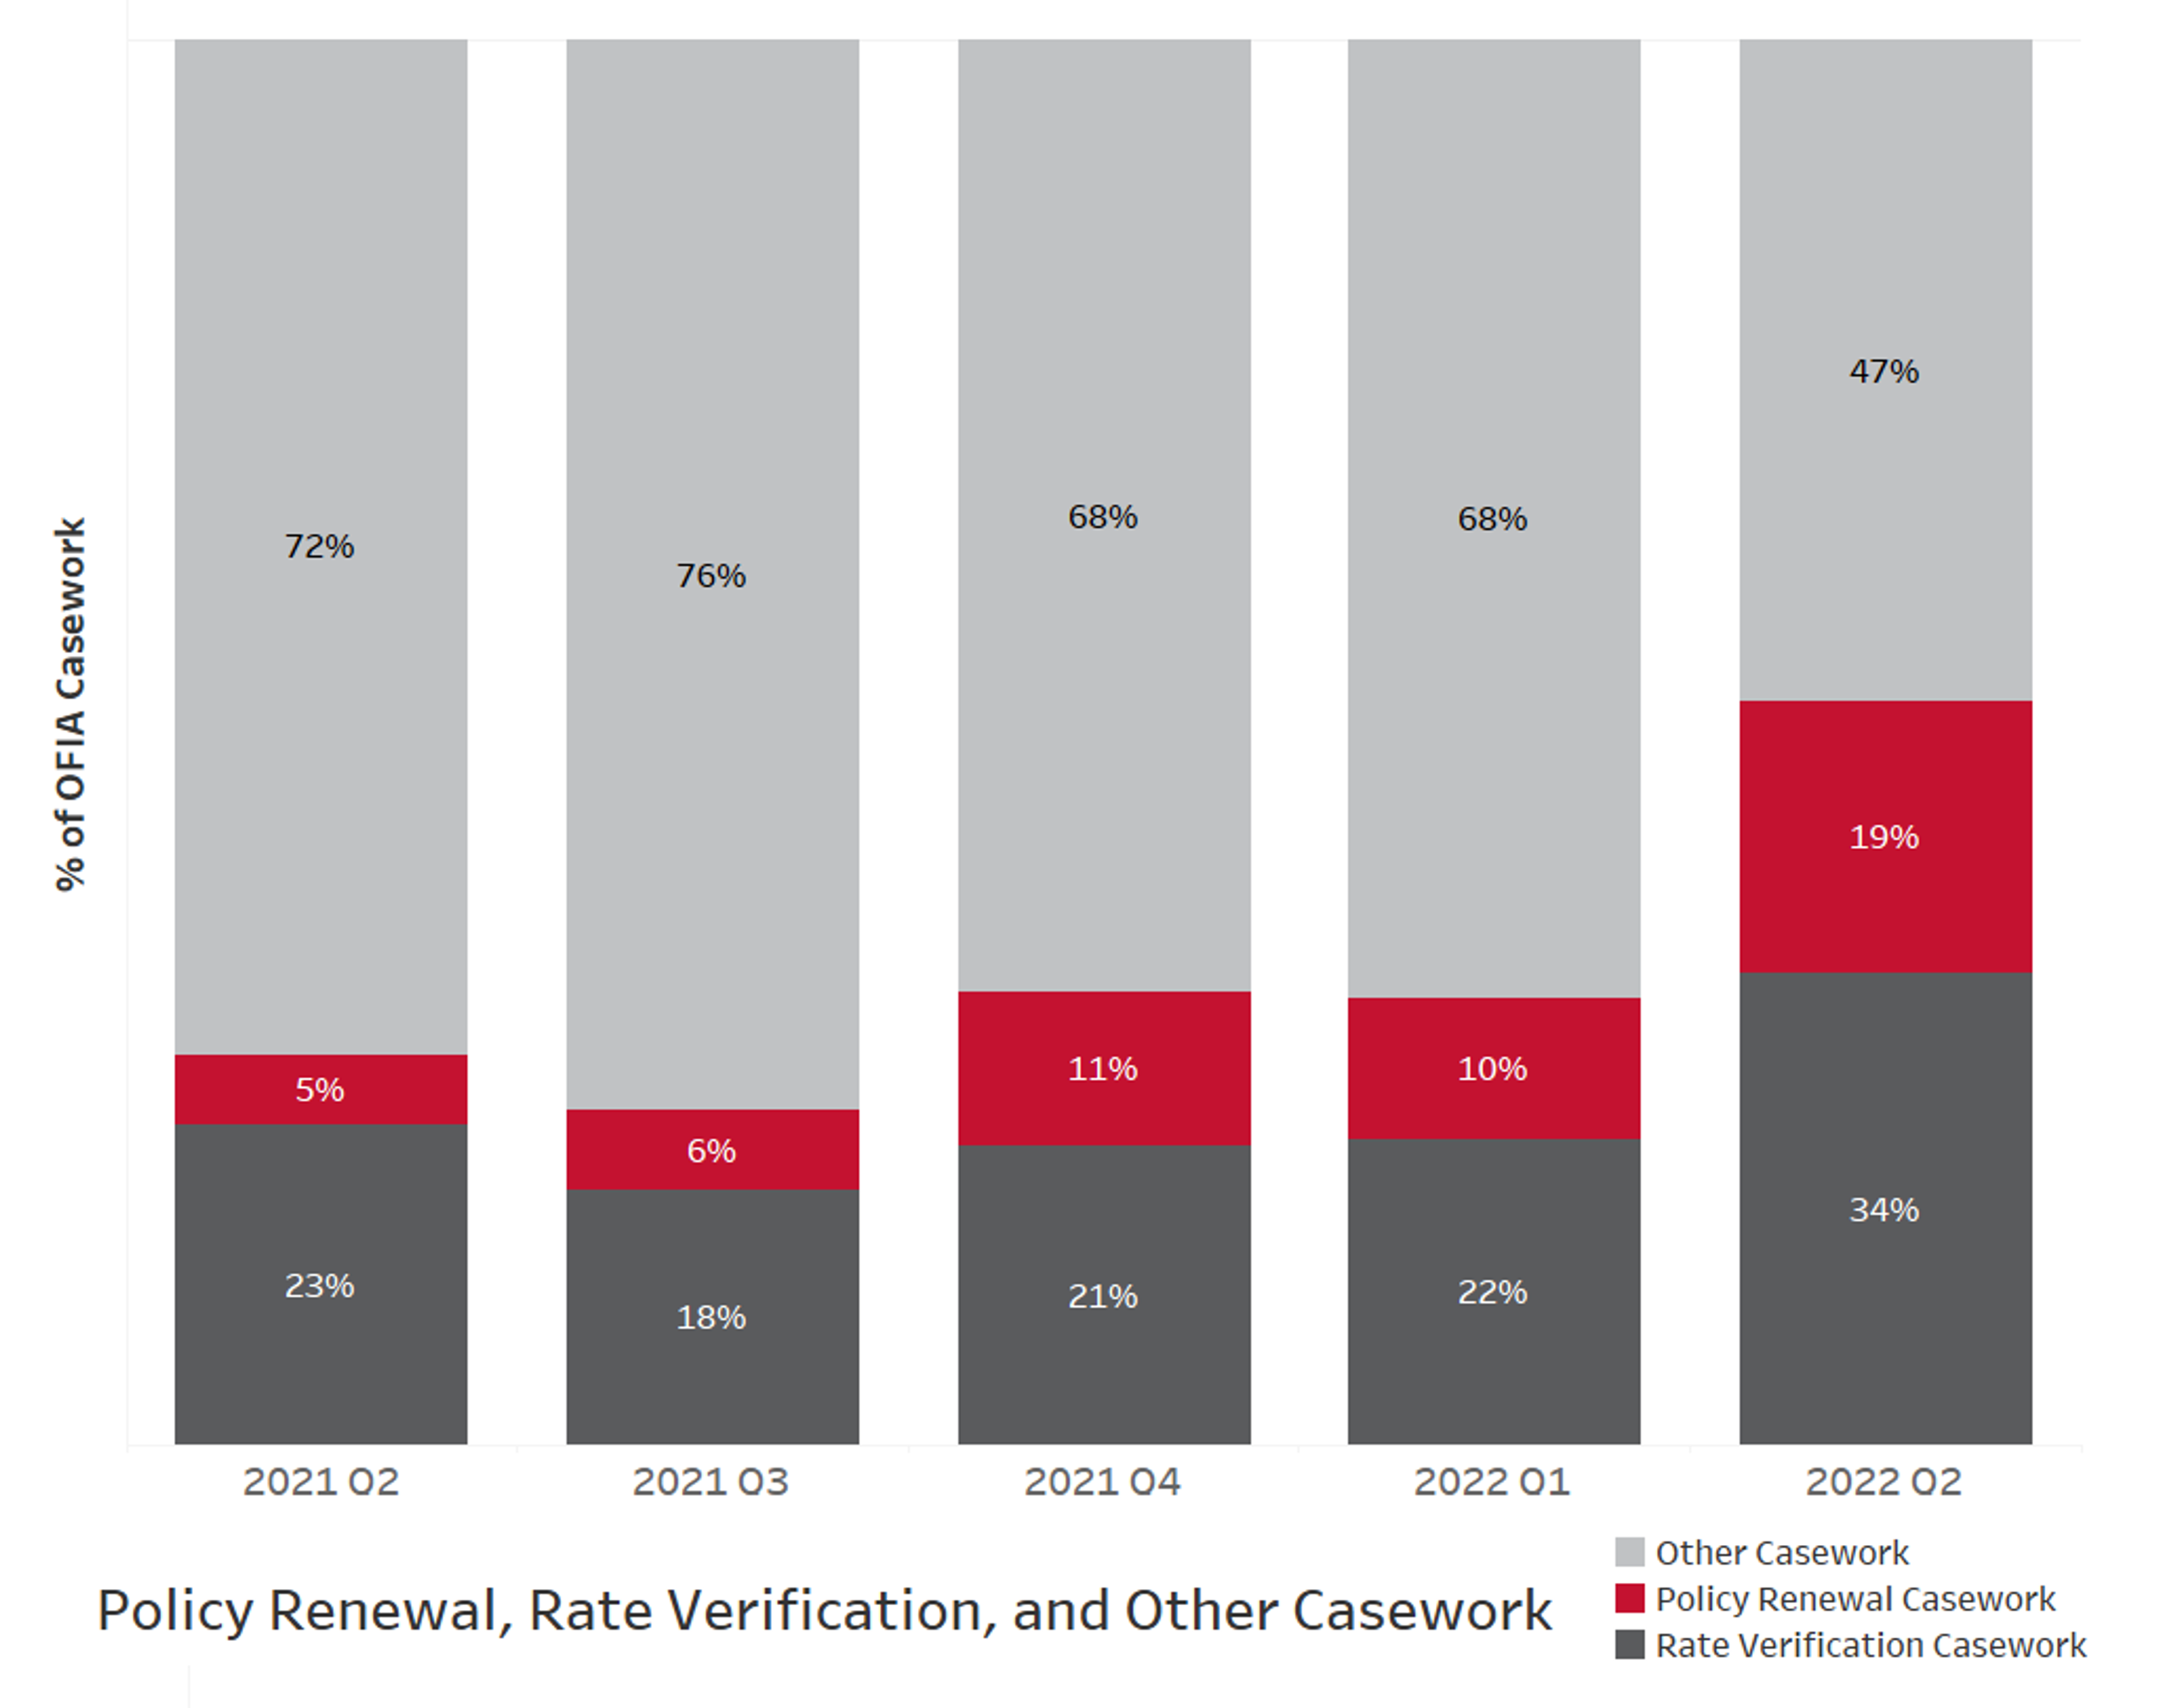 This graph shows the policy renewal, rate verification, and other casework percentages for OFIA. For Q2 2022, 34 percent of case work was rate verification, 19 percent was policy renewal, and 47 percent was other casework.